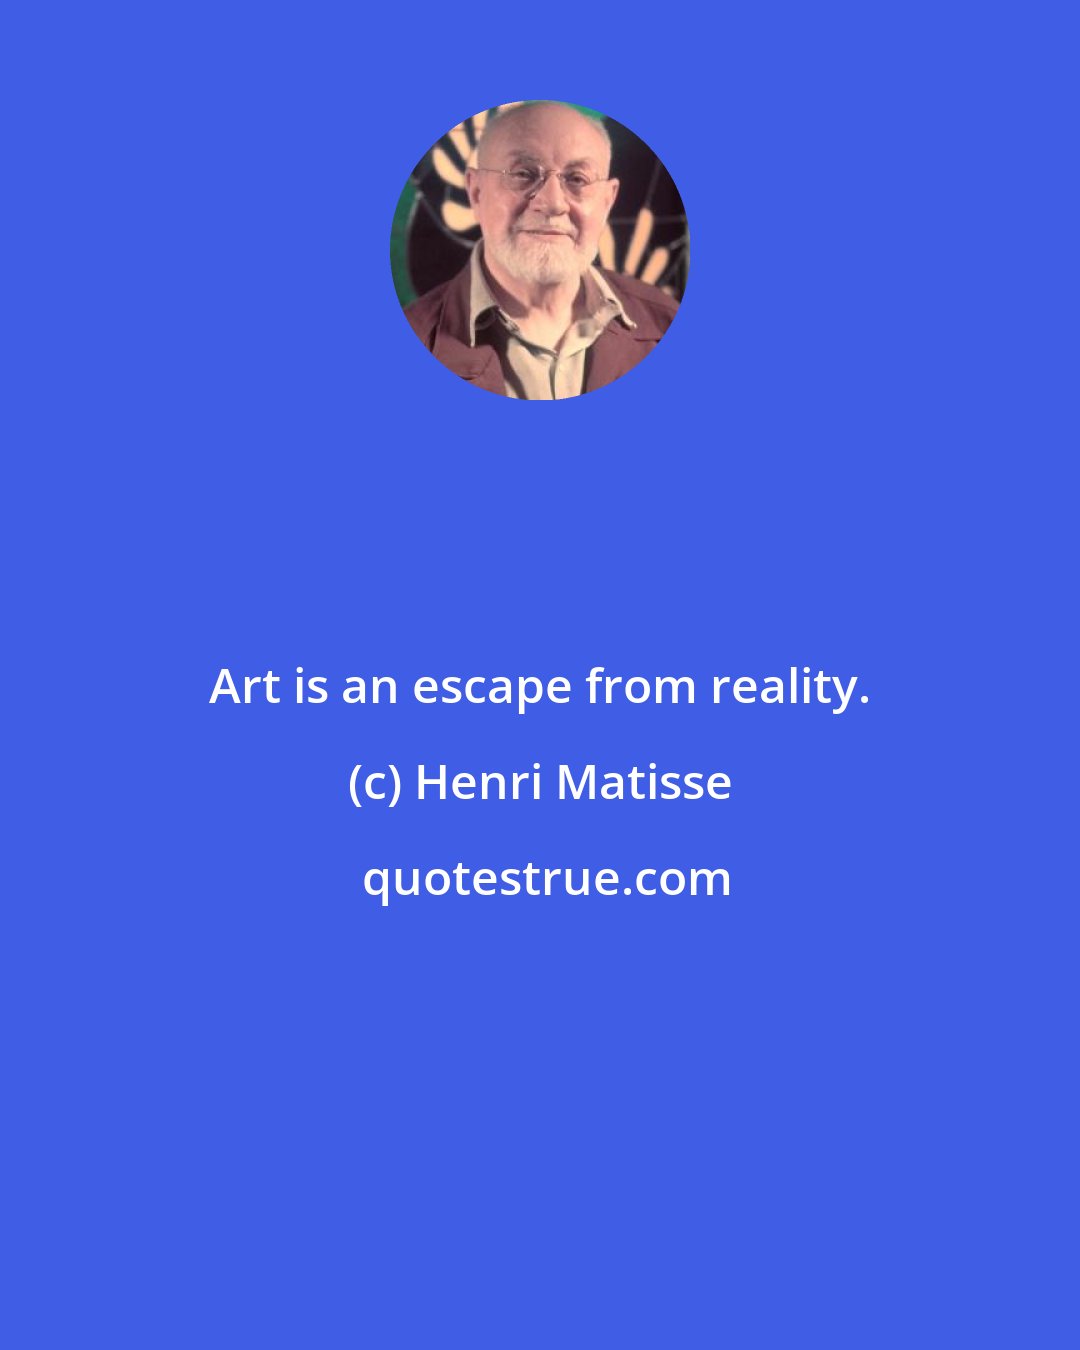 Henri Matisse: Art is an escape from reality.